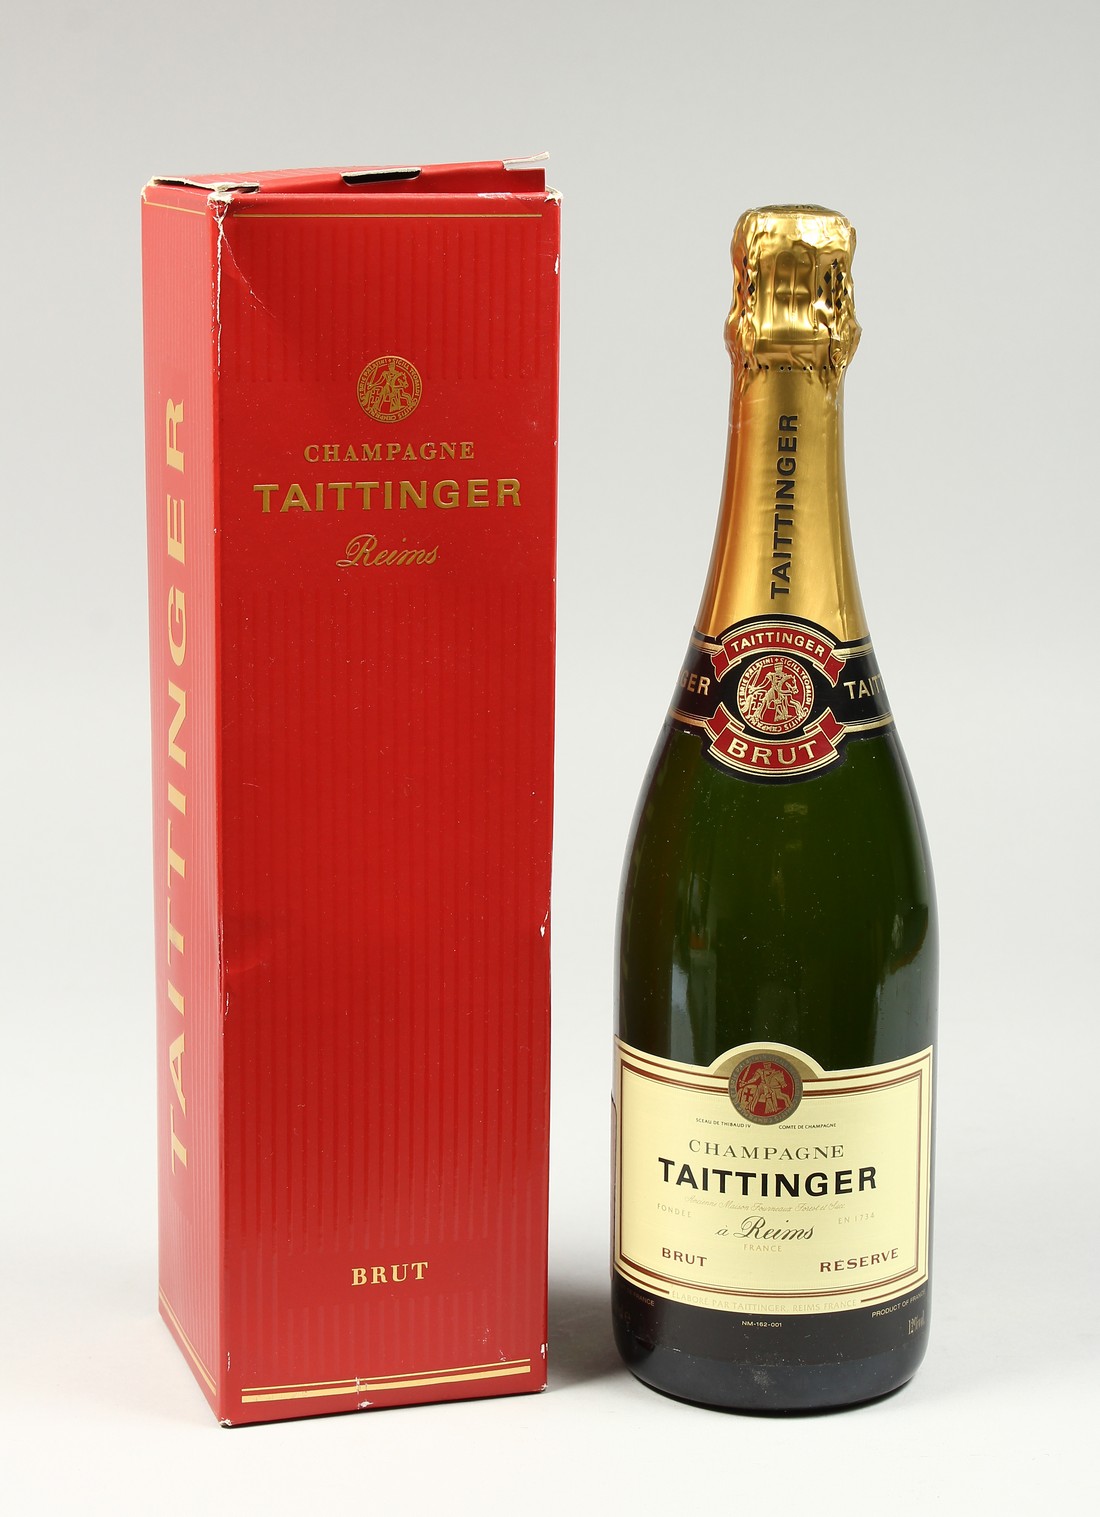 A BOTTLE OF TATTINGER CHAMPAGNE in an unopened box.